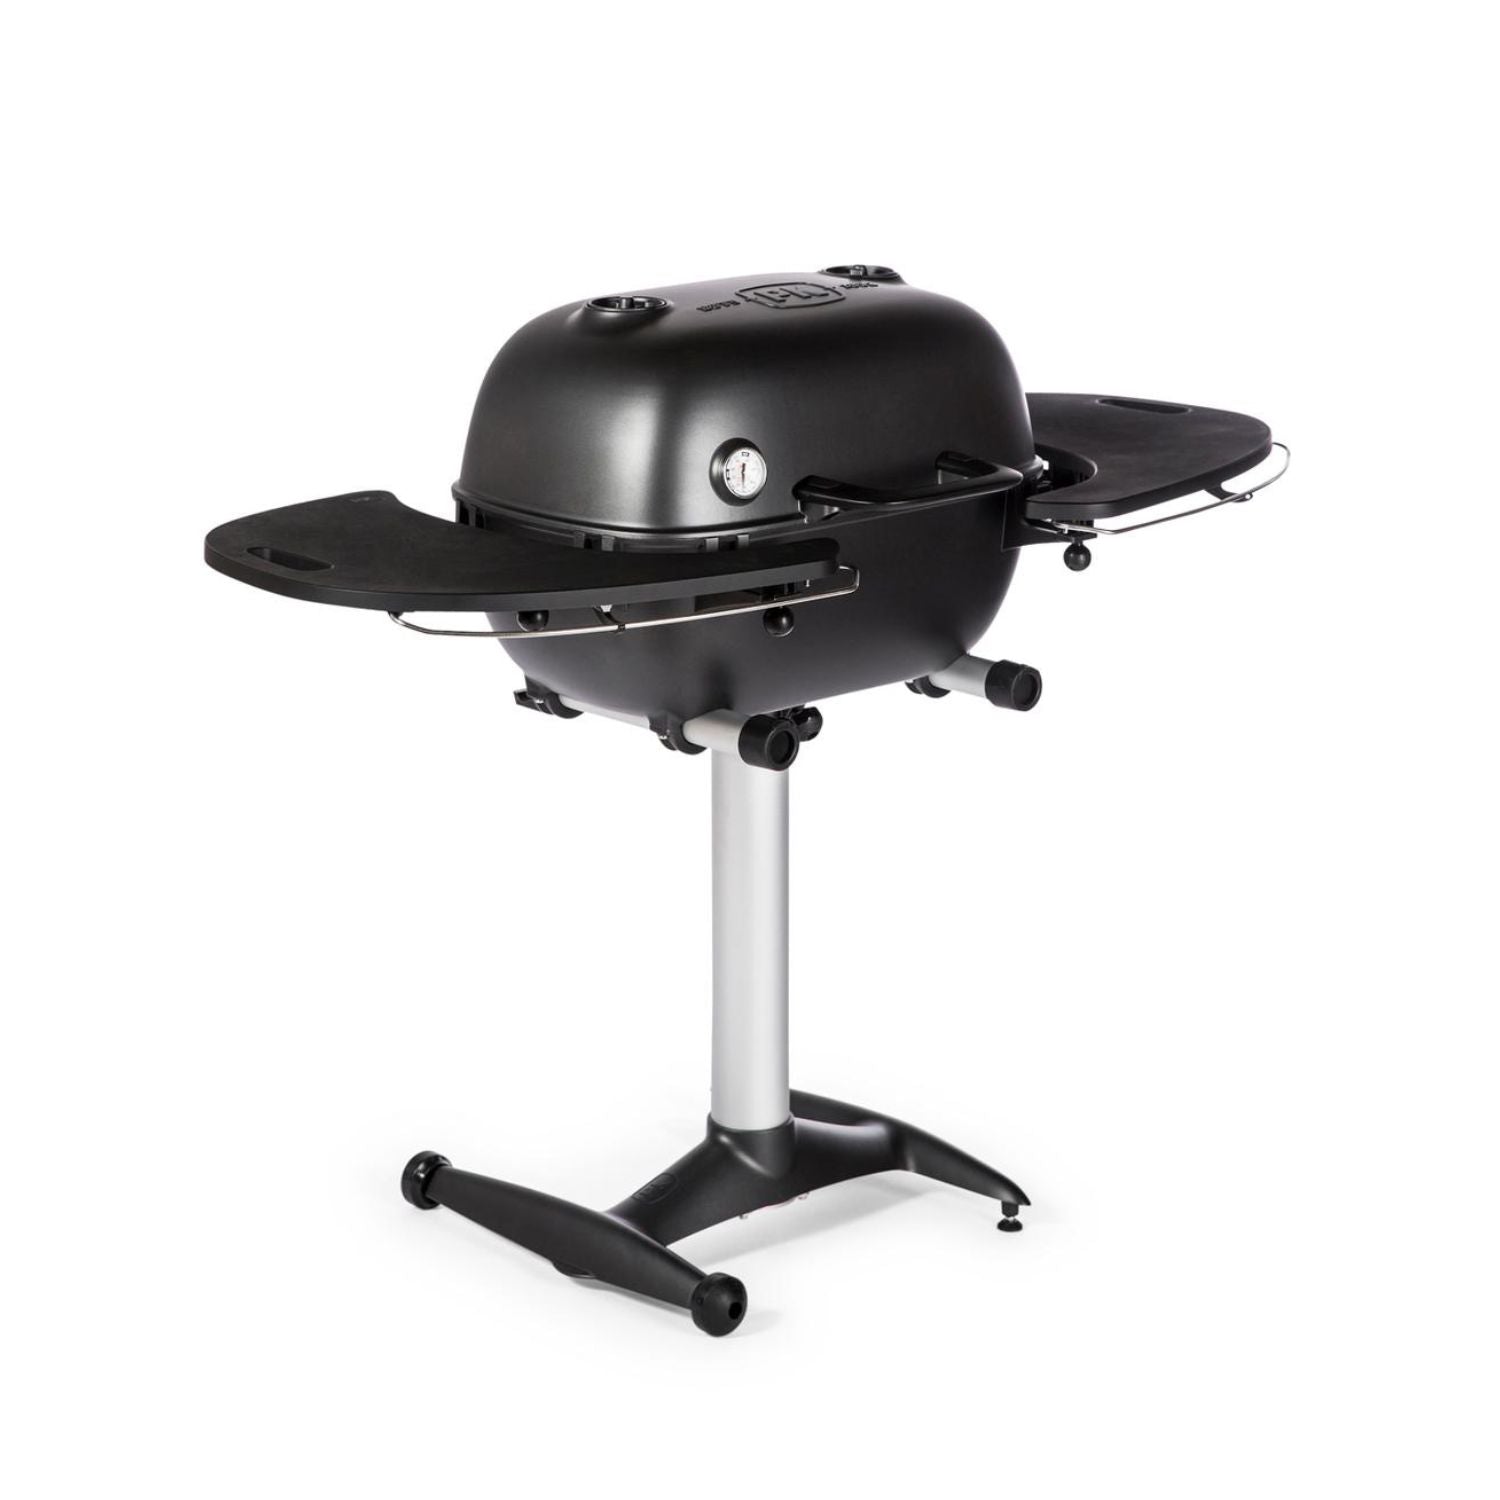 PK Grills PK360 Charcoal Grill, Graphite 12043442